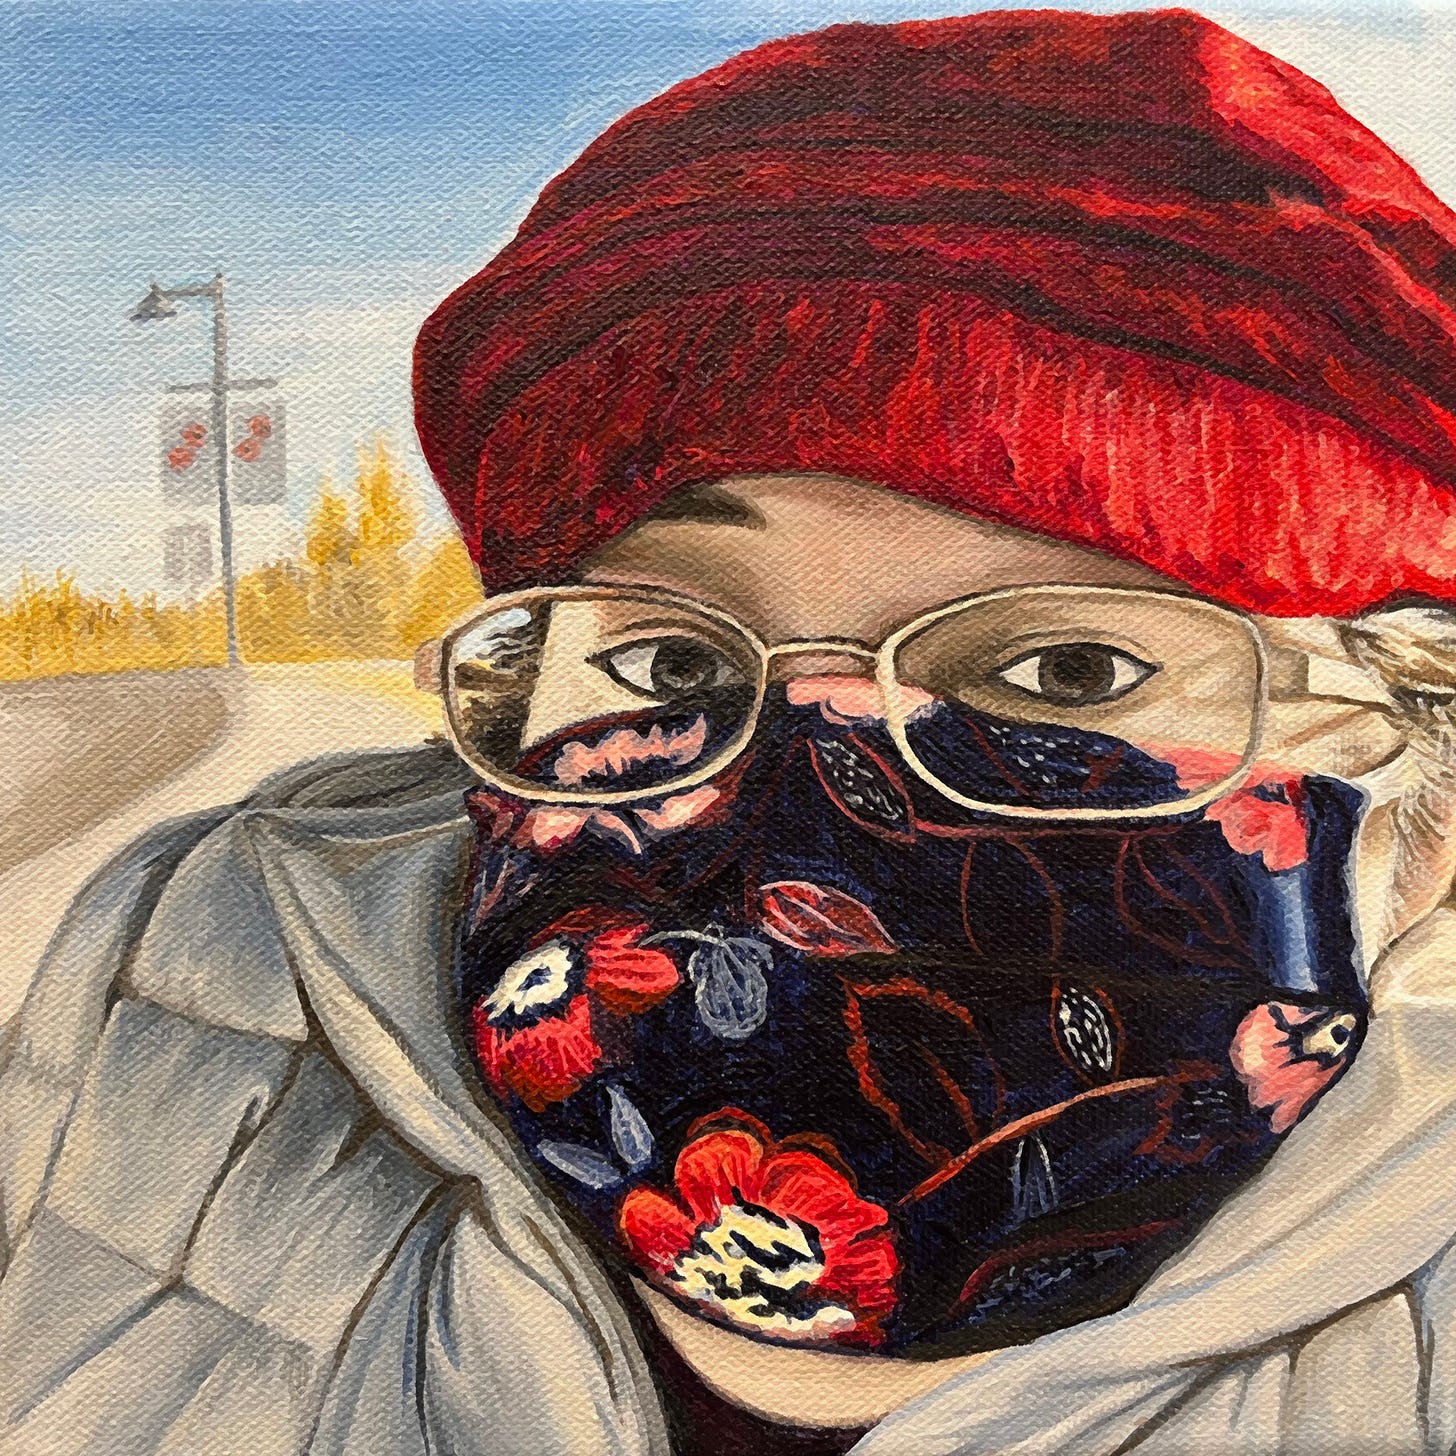 Painting of head and shoulders figure wearing a mask and bundled up for a chilly day. She wears a knitted red cap, rectangular glasses and a dark blue mask with a red floral print. Her dark eyes gaze directly and intensely at the viewer. The sky behind her bright blue and the street winds around a corner away from her and is punctuated with street lamps that have banners with poppies on them.